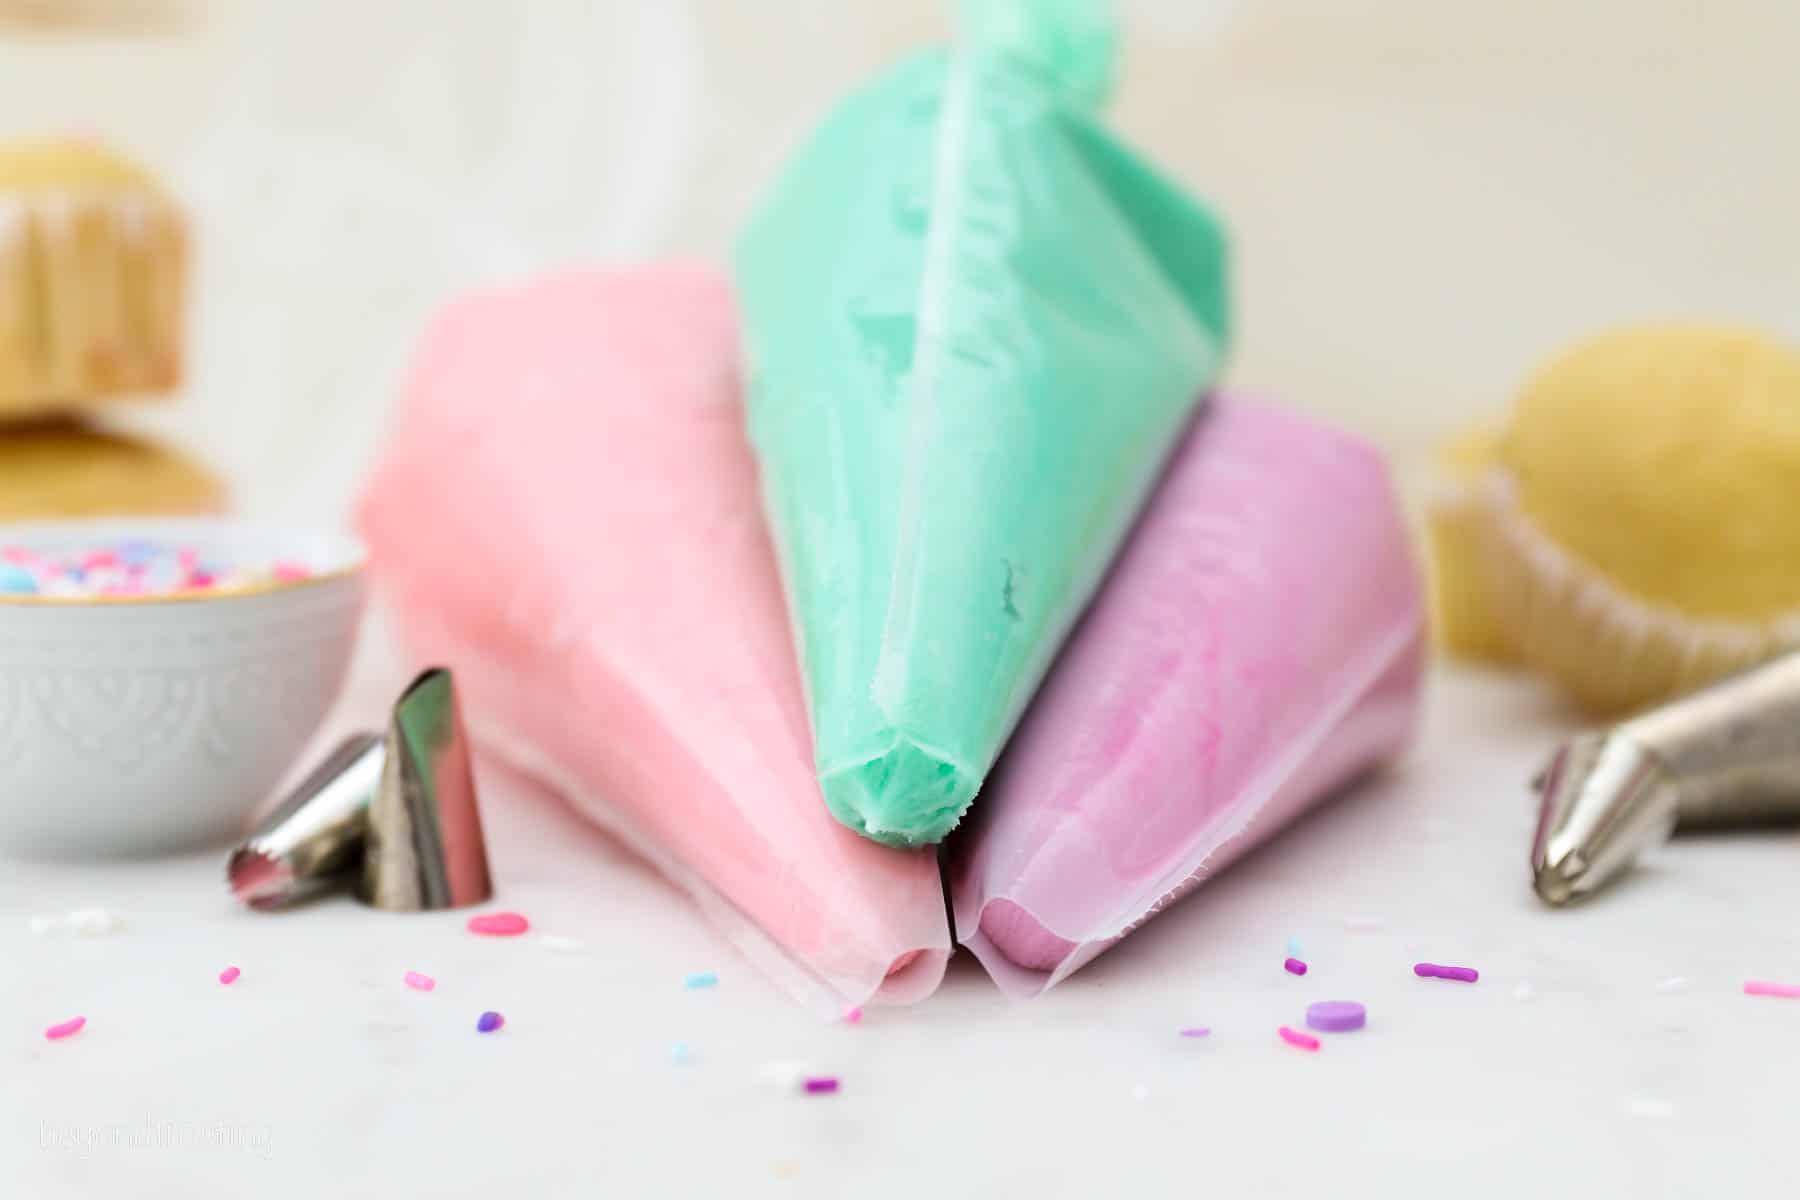 Three piping bags filled with purple, pink, and light turquoise buttercream frosting.